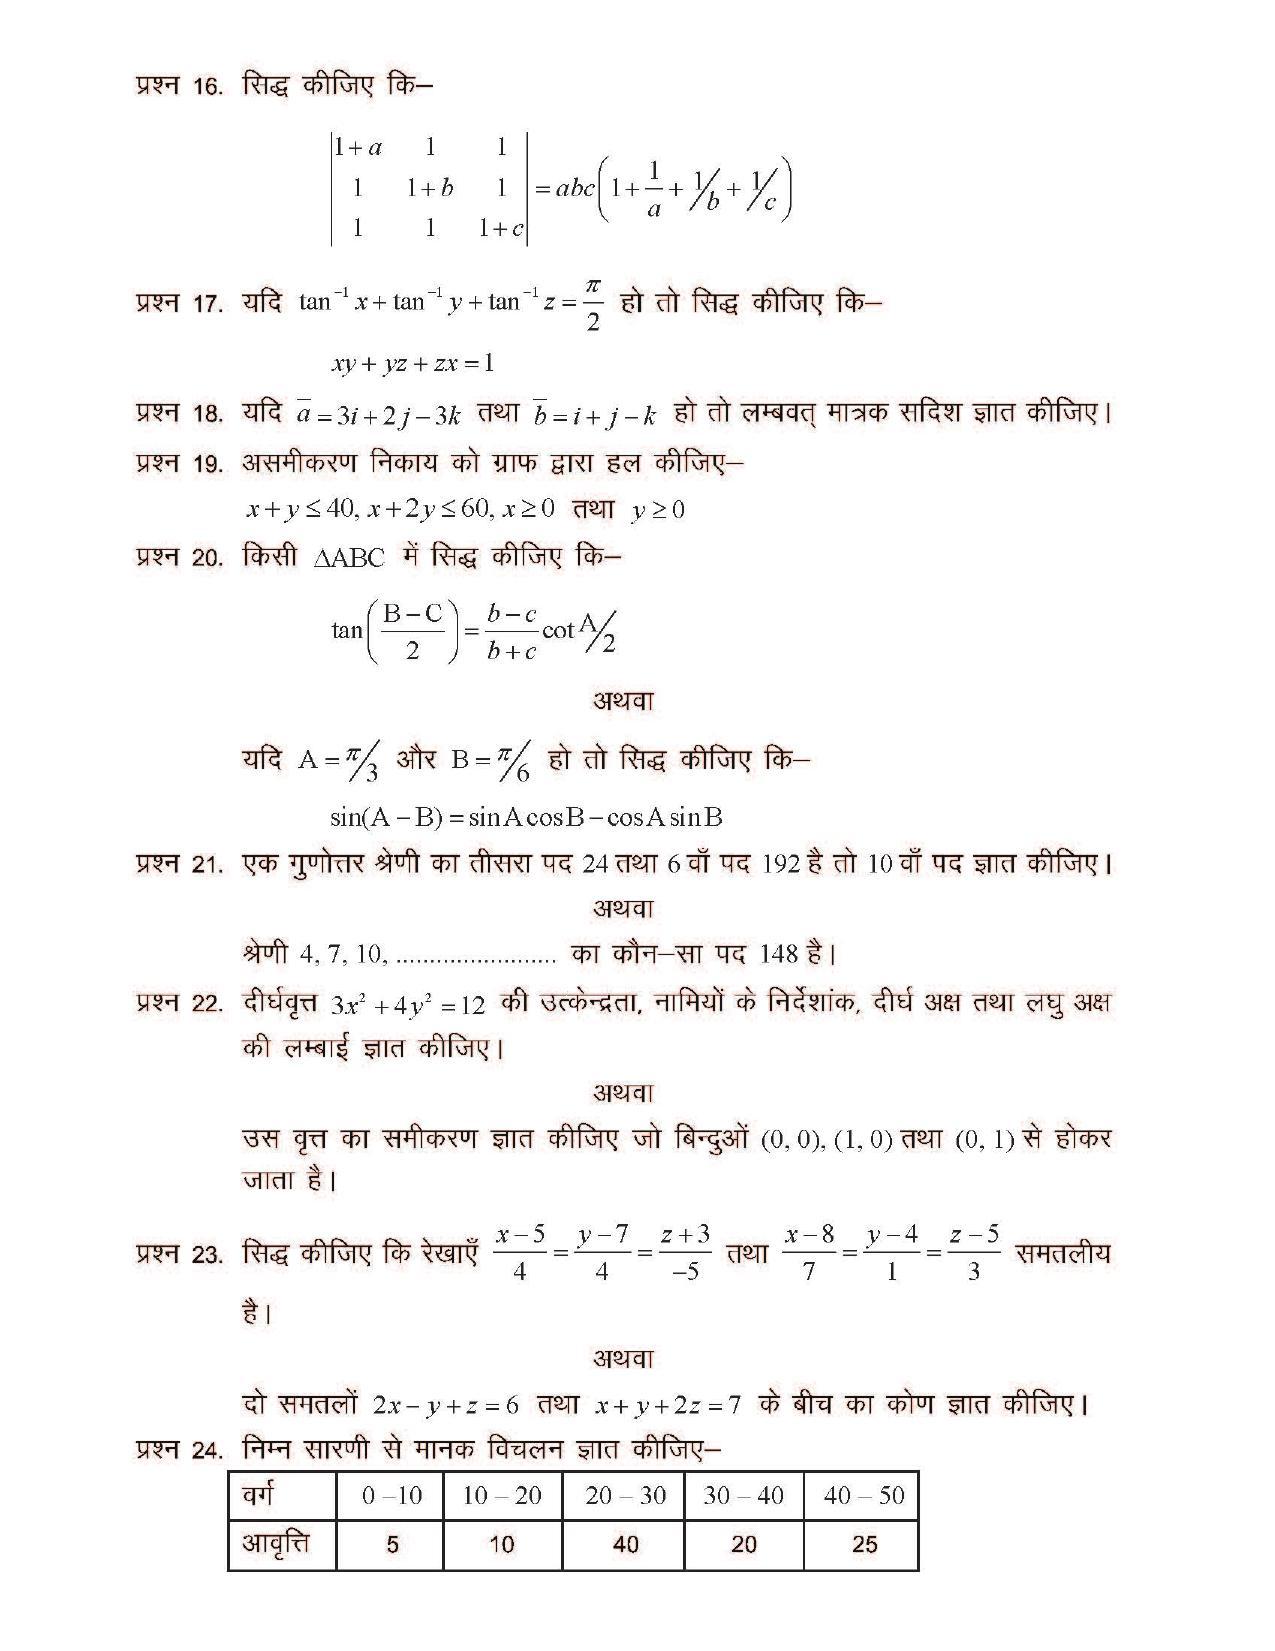 CGSOS Class 12 Model Question Paper - Maths - II - Page 4